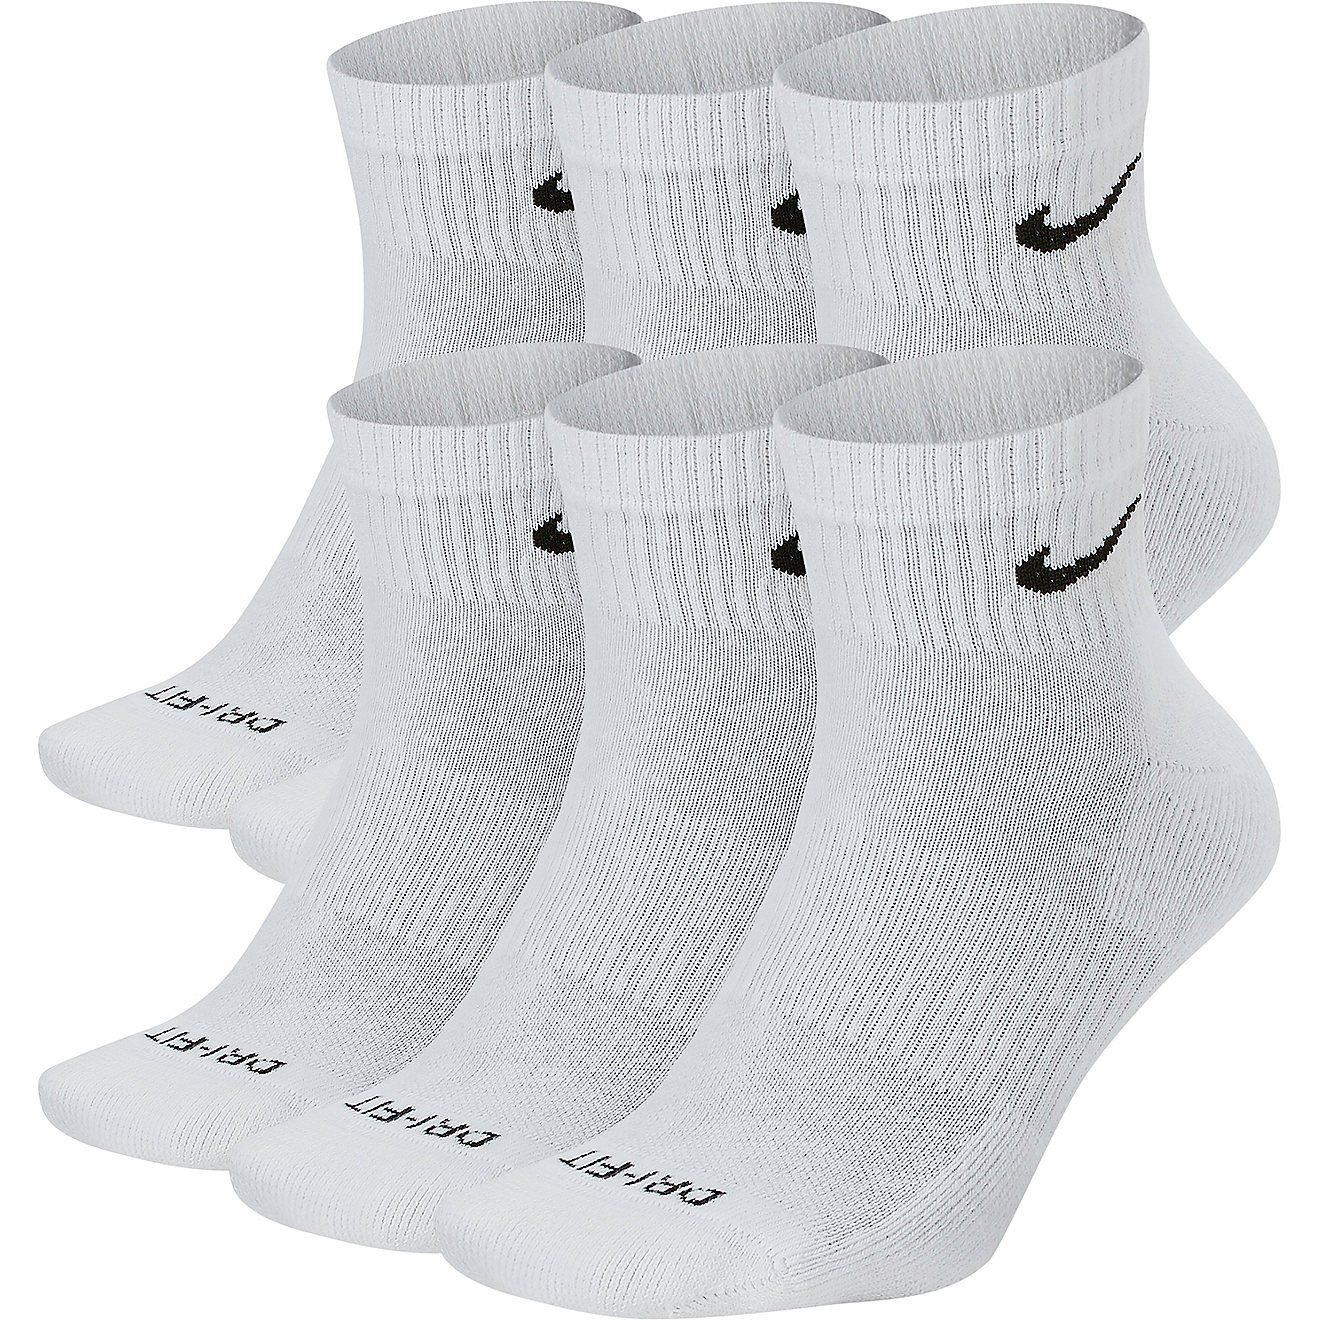 Nike Men's Everyday Plus Cushion Dri-FIT Training Ankle Socks 6 Pack | Academy | Academy Sports + Outdoors